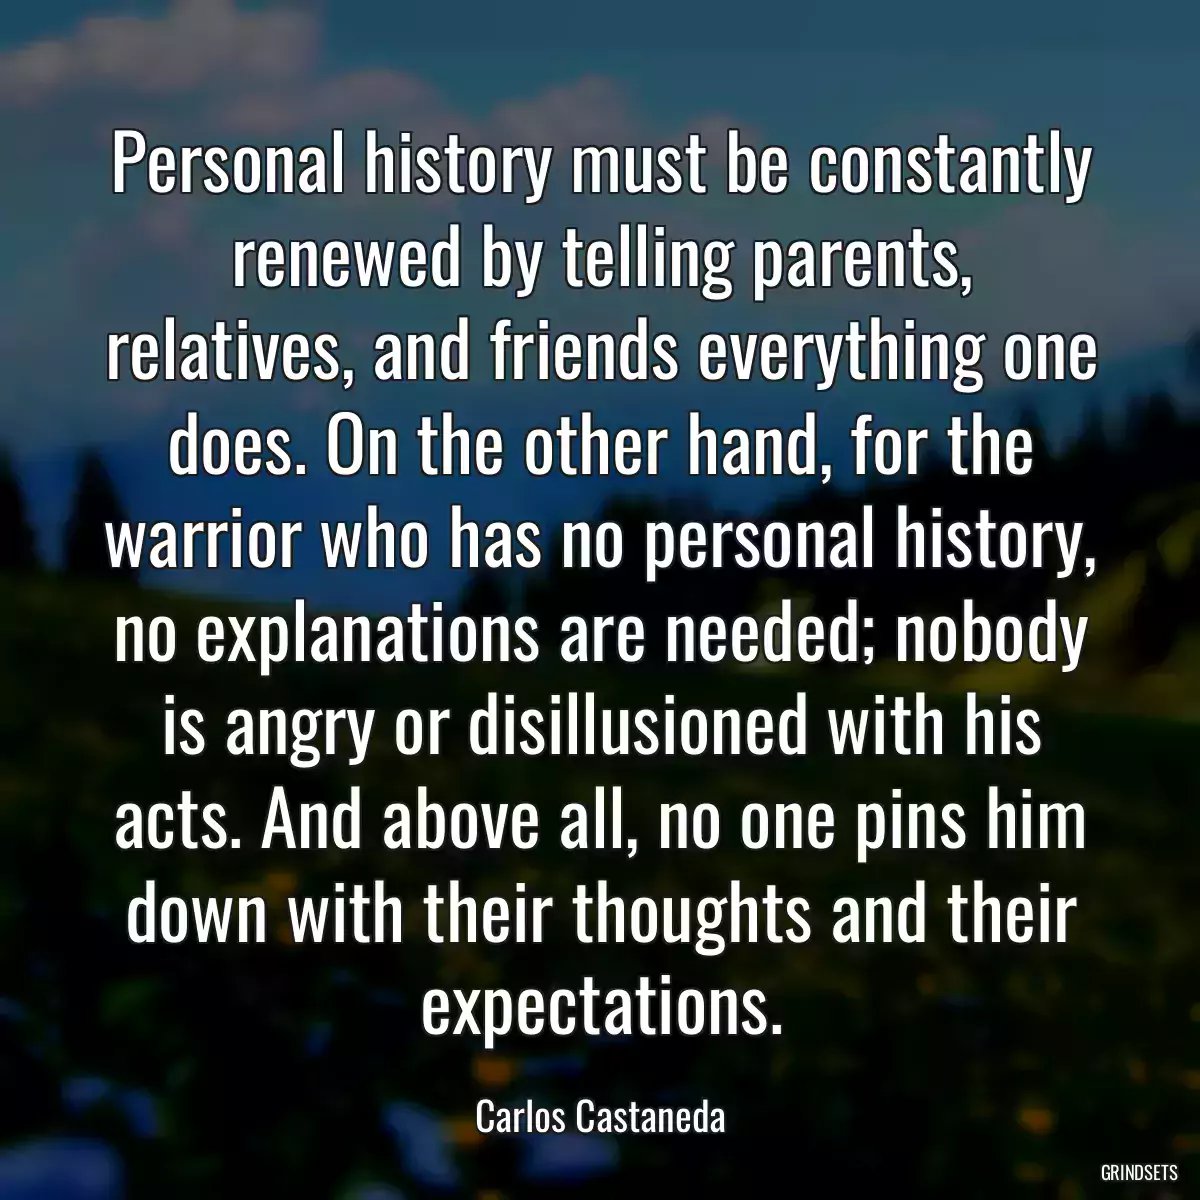 Personal history must be constantly renewed by telling parents, relatives, and friends everything one does. On the other hand, for the warrior who has no personal history, no explanations are needed; nobody is angry or disillusioned with his acts. And above all, no one pins him down with their thoughts and their expectations.